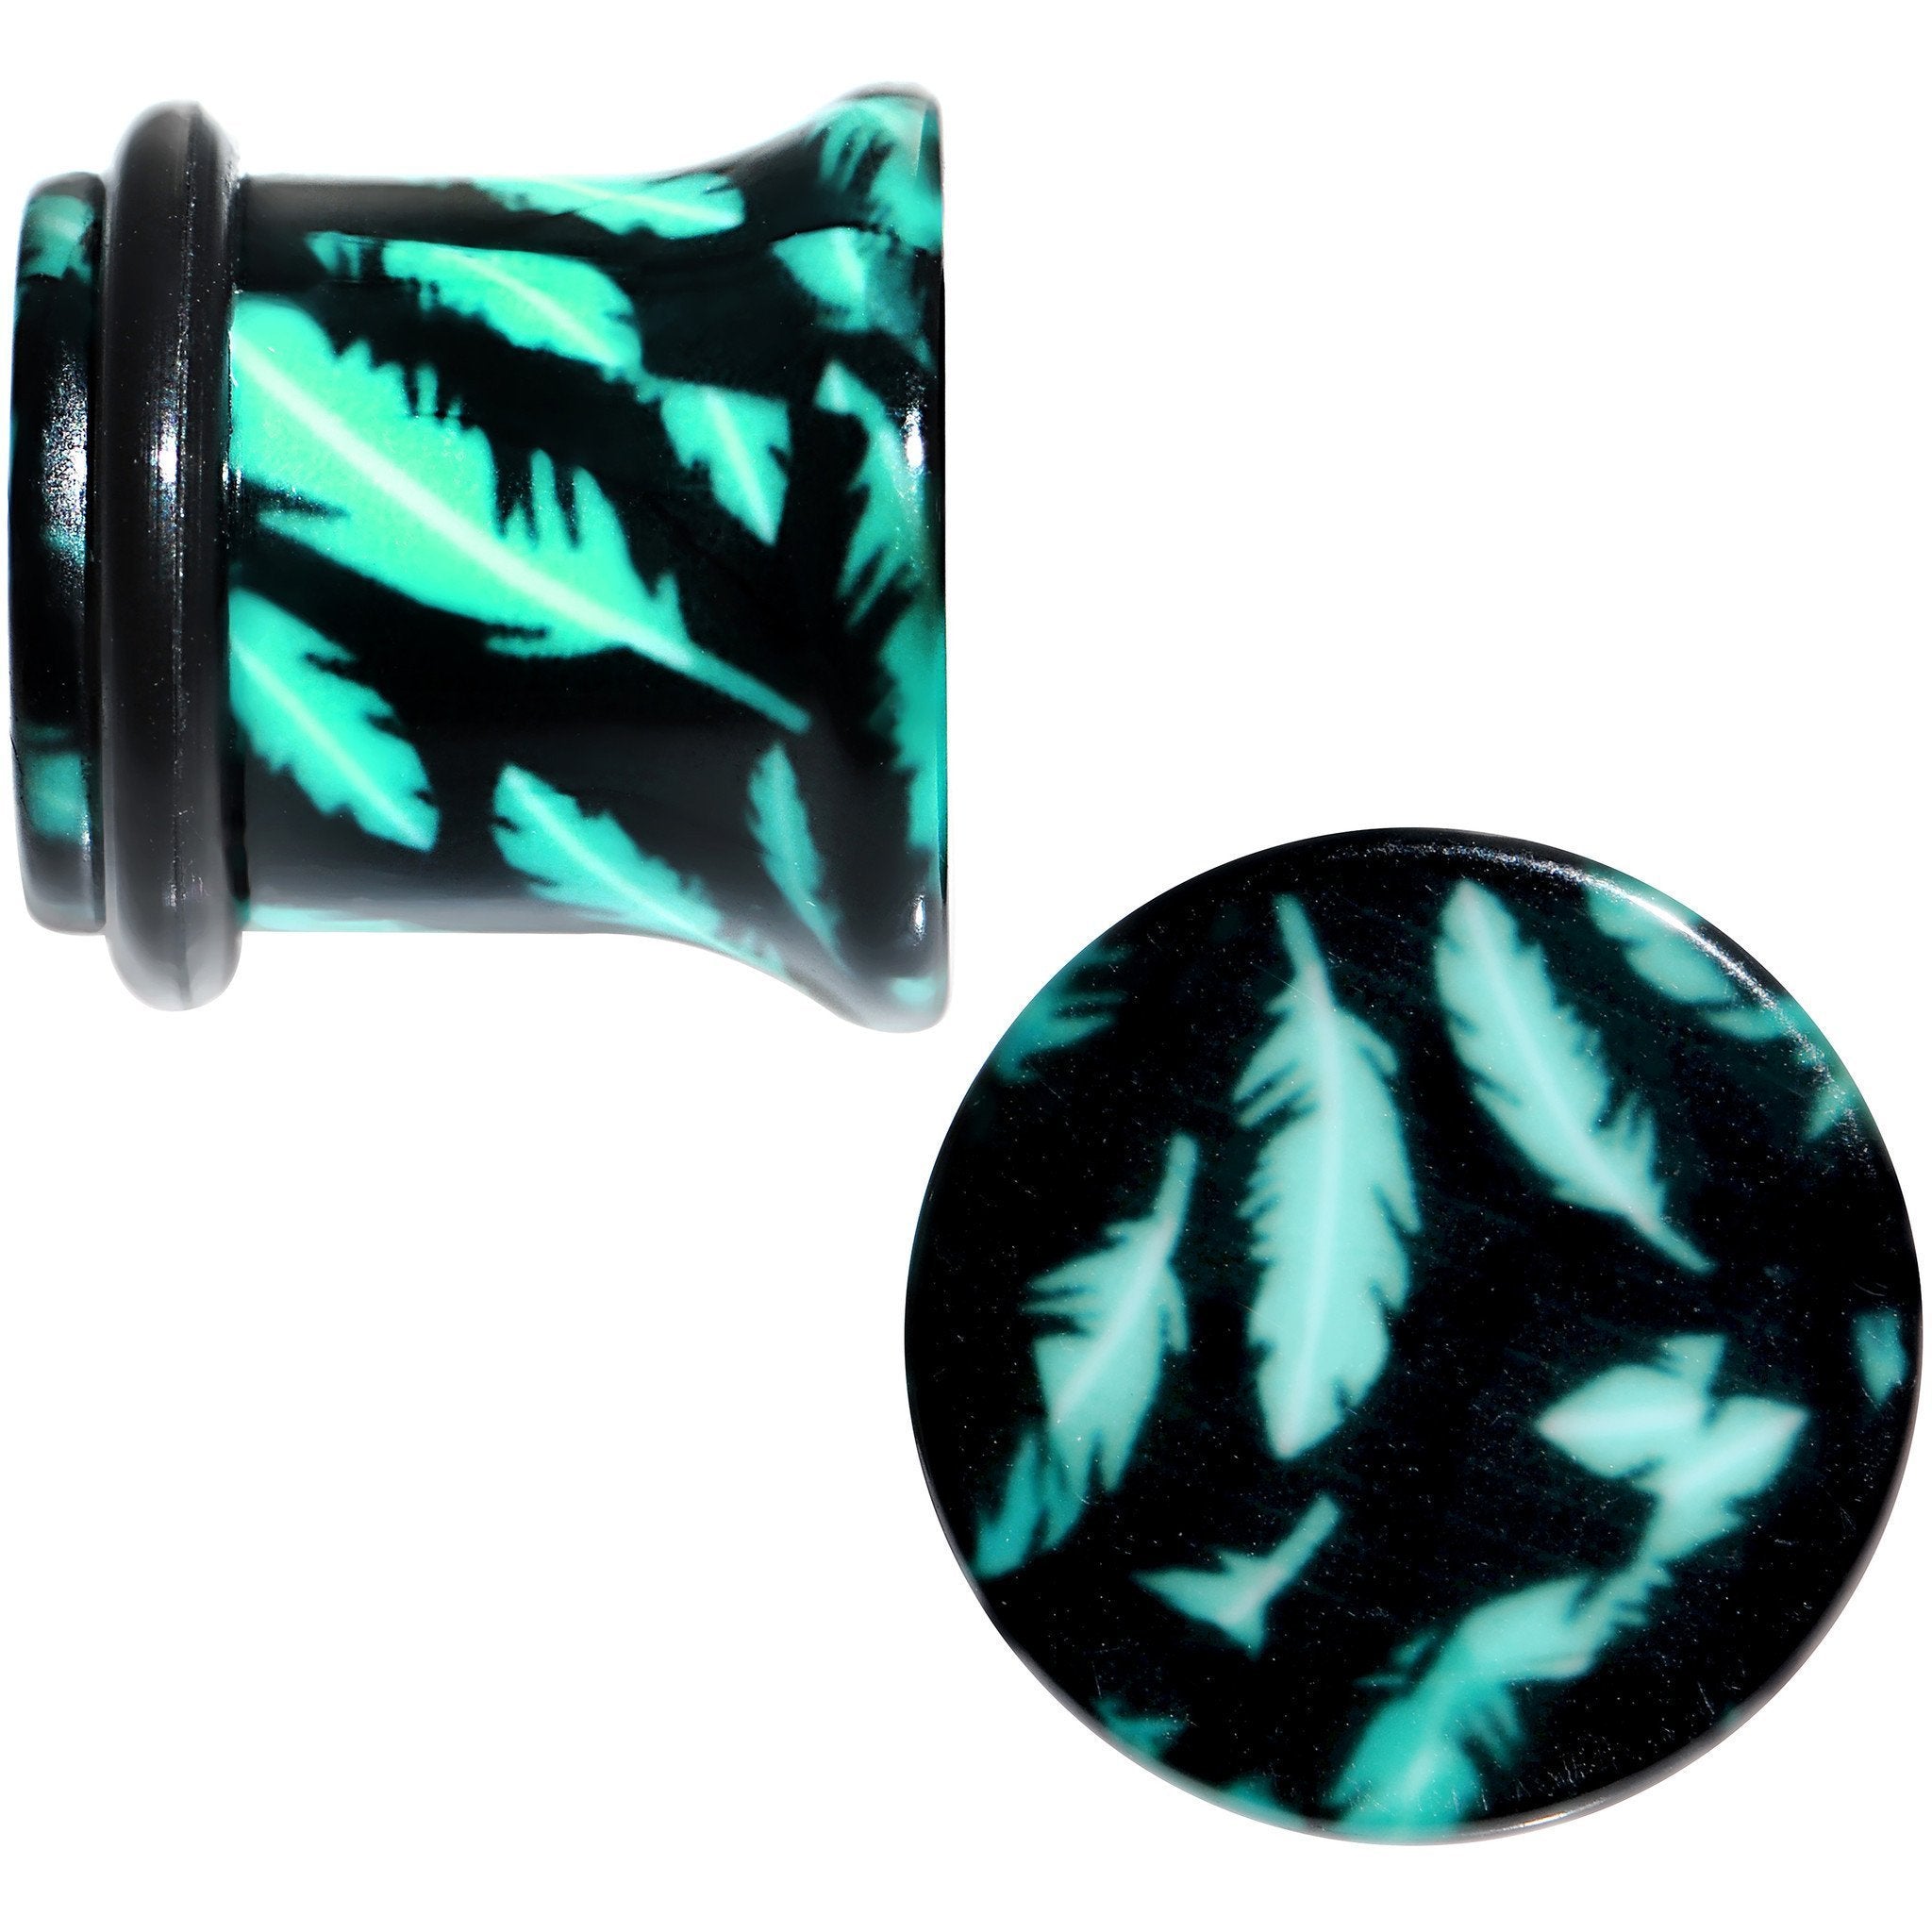 Black Acrylic Teal Feather Single Flare Plug Set Available in Sizes 3mm to 16mm